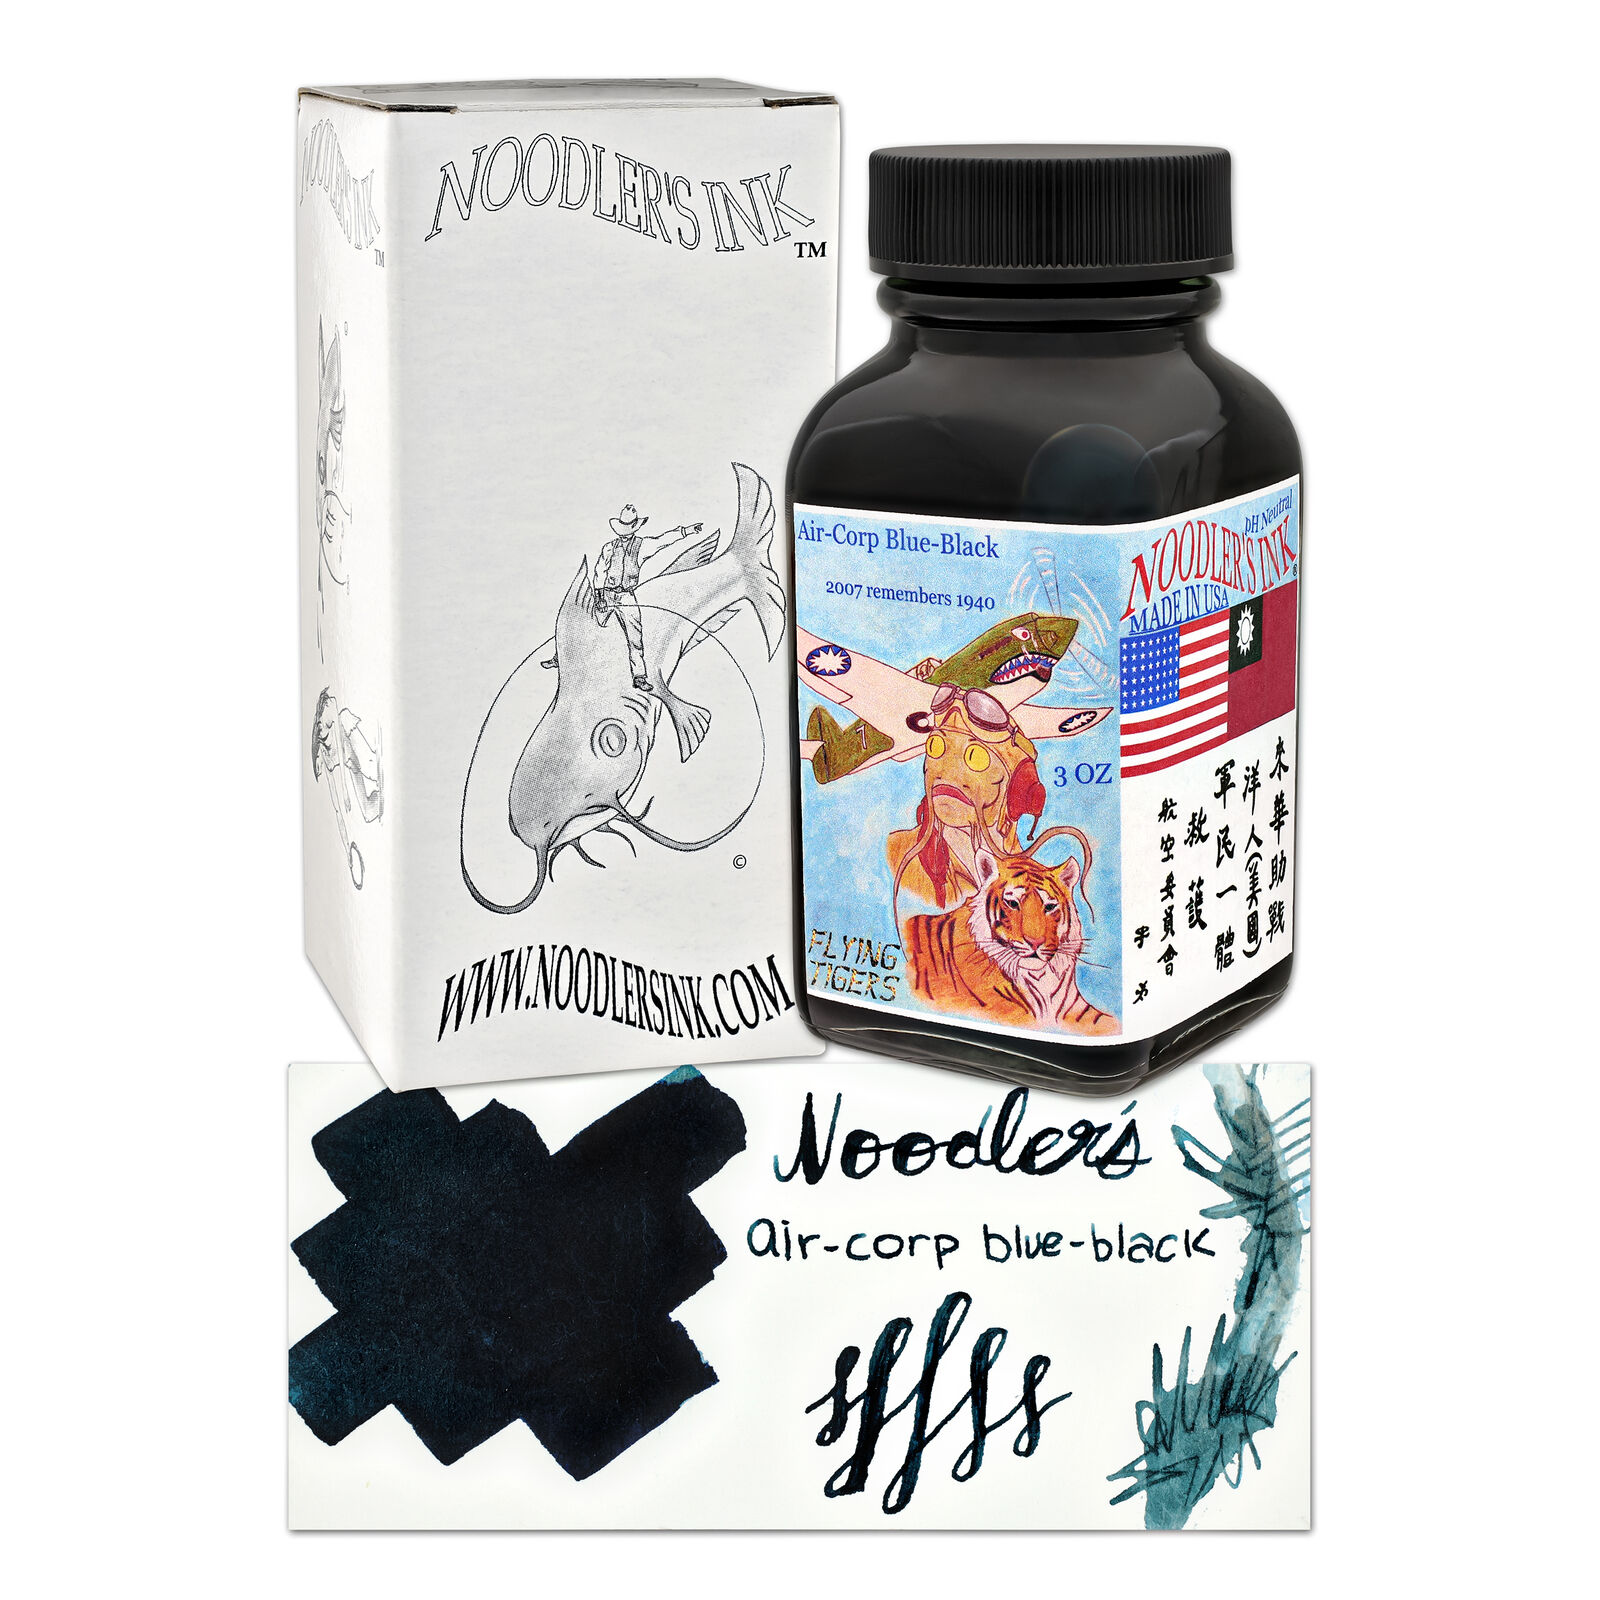 Noodler's Bottled Ink for Fountain Pens in Air-Corp Blue-Black - 3oz -NEW in Box